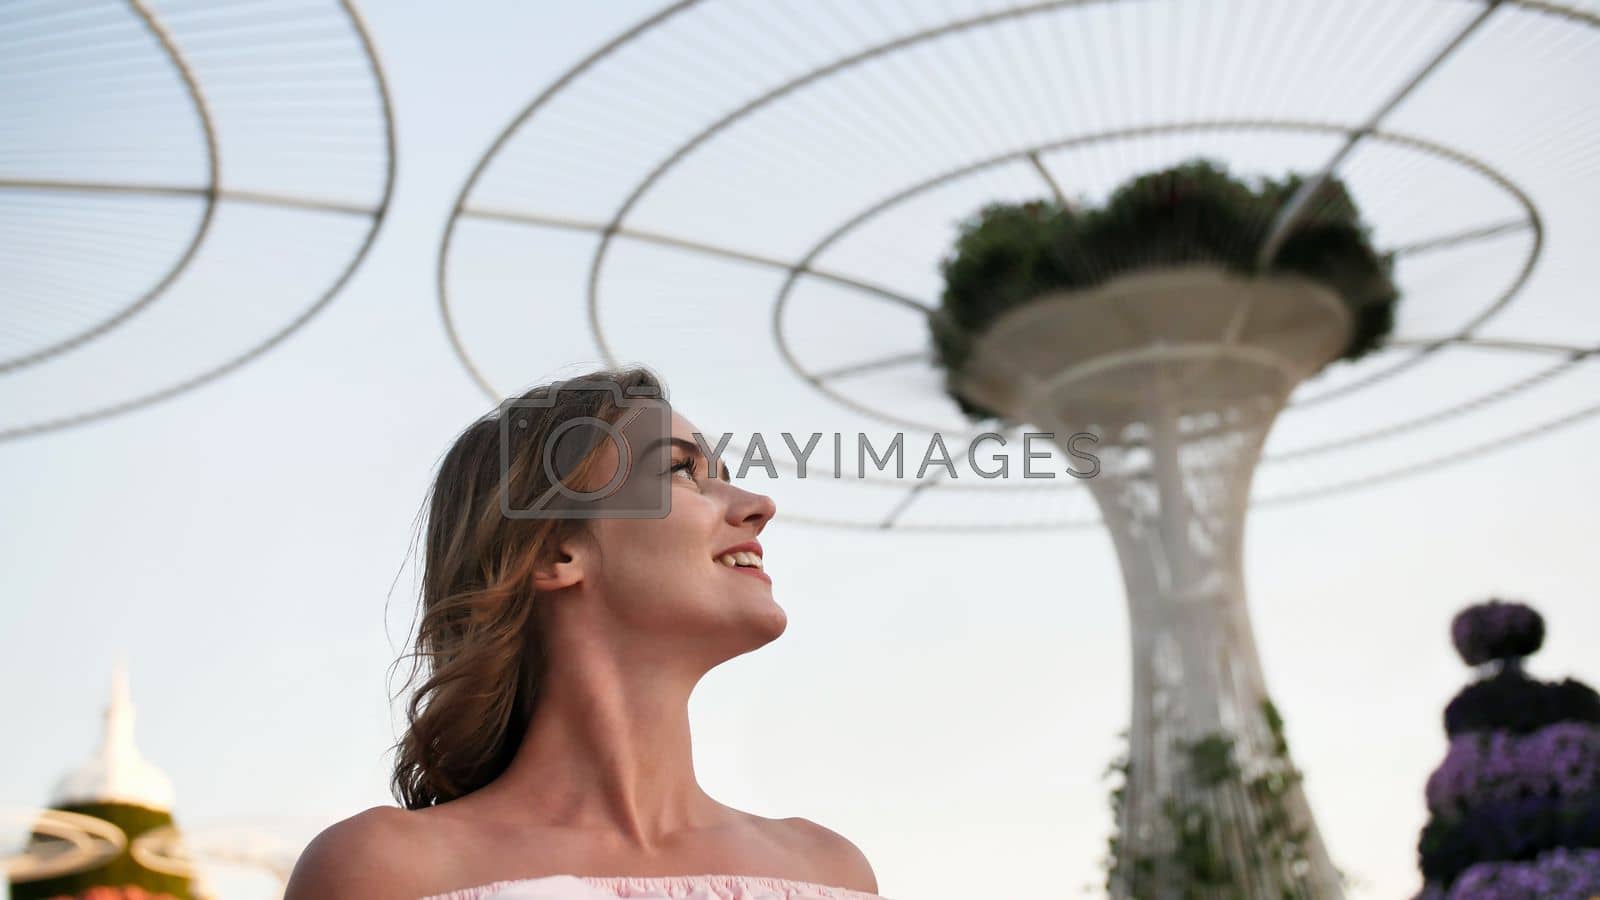 Royalty free image of Girl on the background futuristic metal flowers in Dubai Miracle Garden Park. by DovidPro